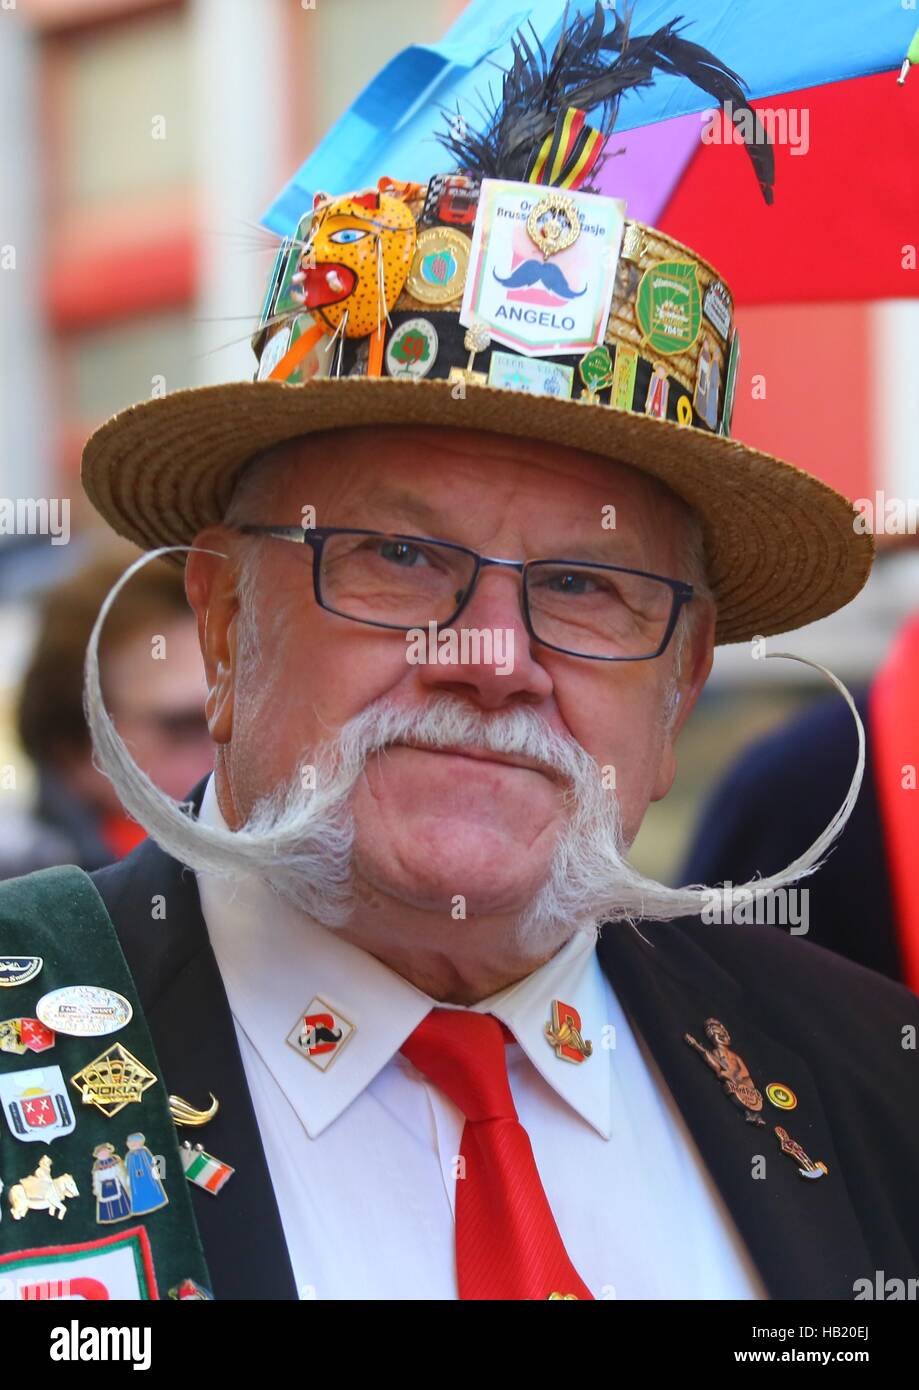 Brussels, Belgium. 3rd Dec, 2016. A man participates in the Saint-Nicolas Parade in Brussels, Belgium, Dec. 3, 2016. Saint-Nicolas, who is one of the sources of the popular Christmas icon of Santa Claus, is celebrated annually on the Saint Nicholas Day. Credit:  Gong Bing/Xinhua/Alamy Live News Stock Photo